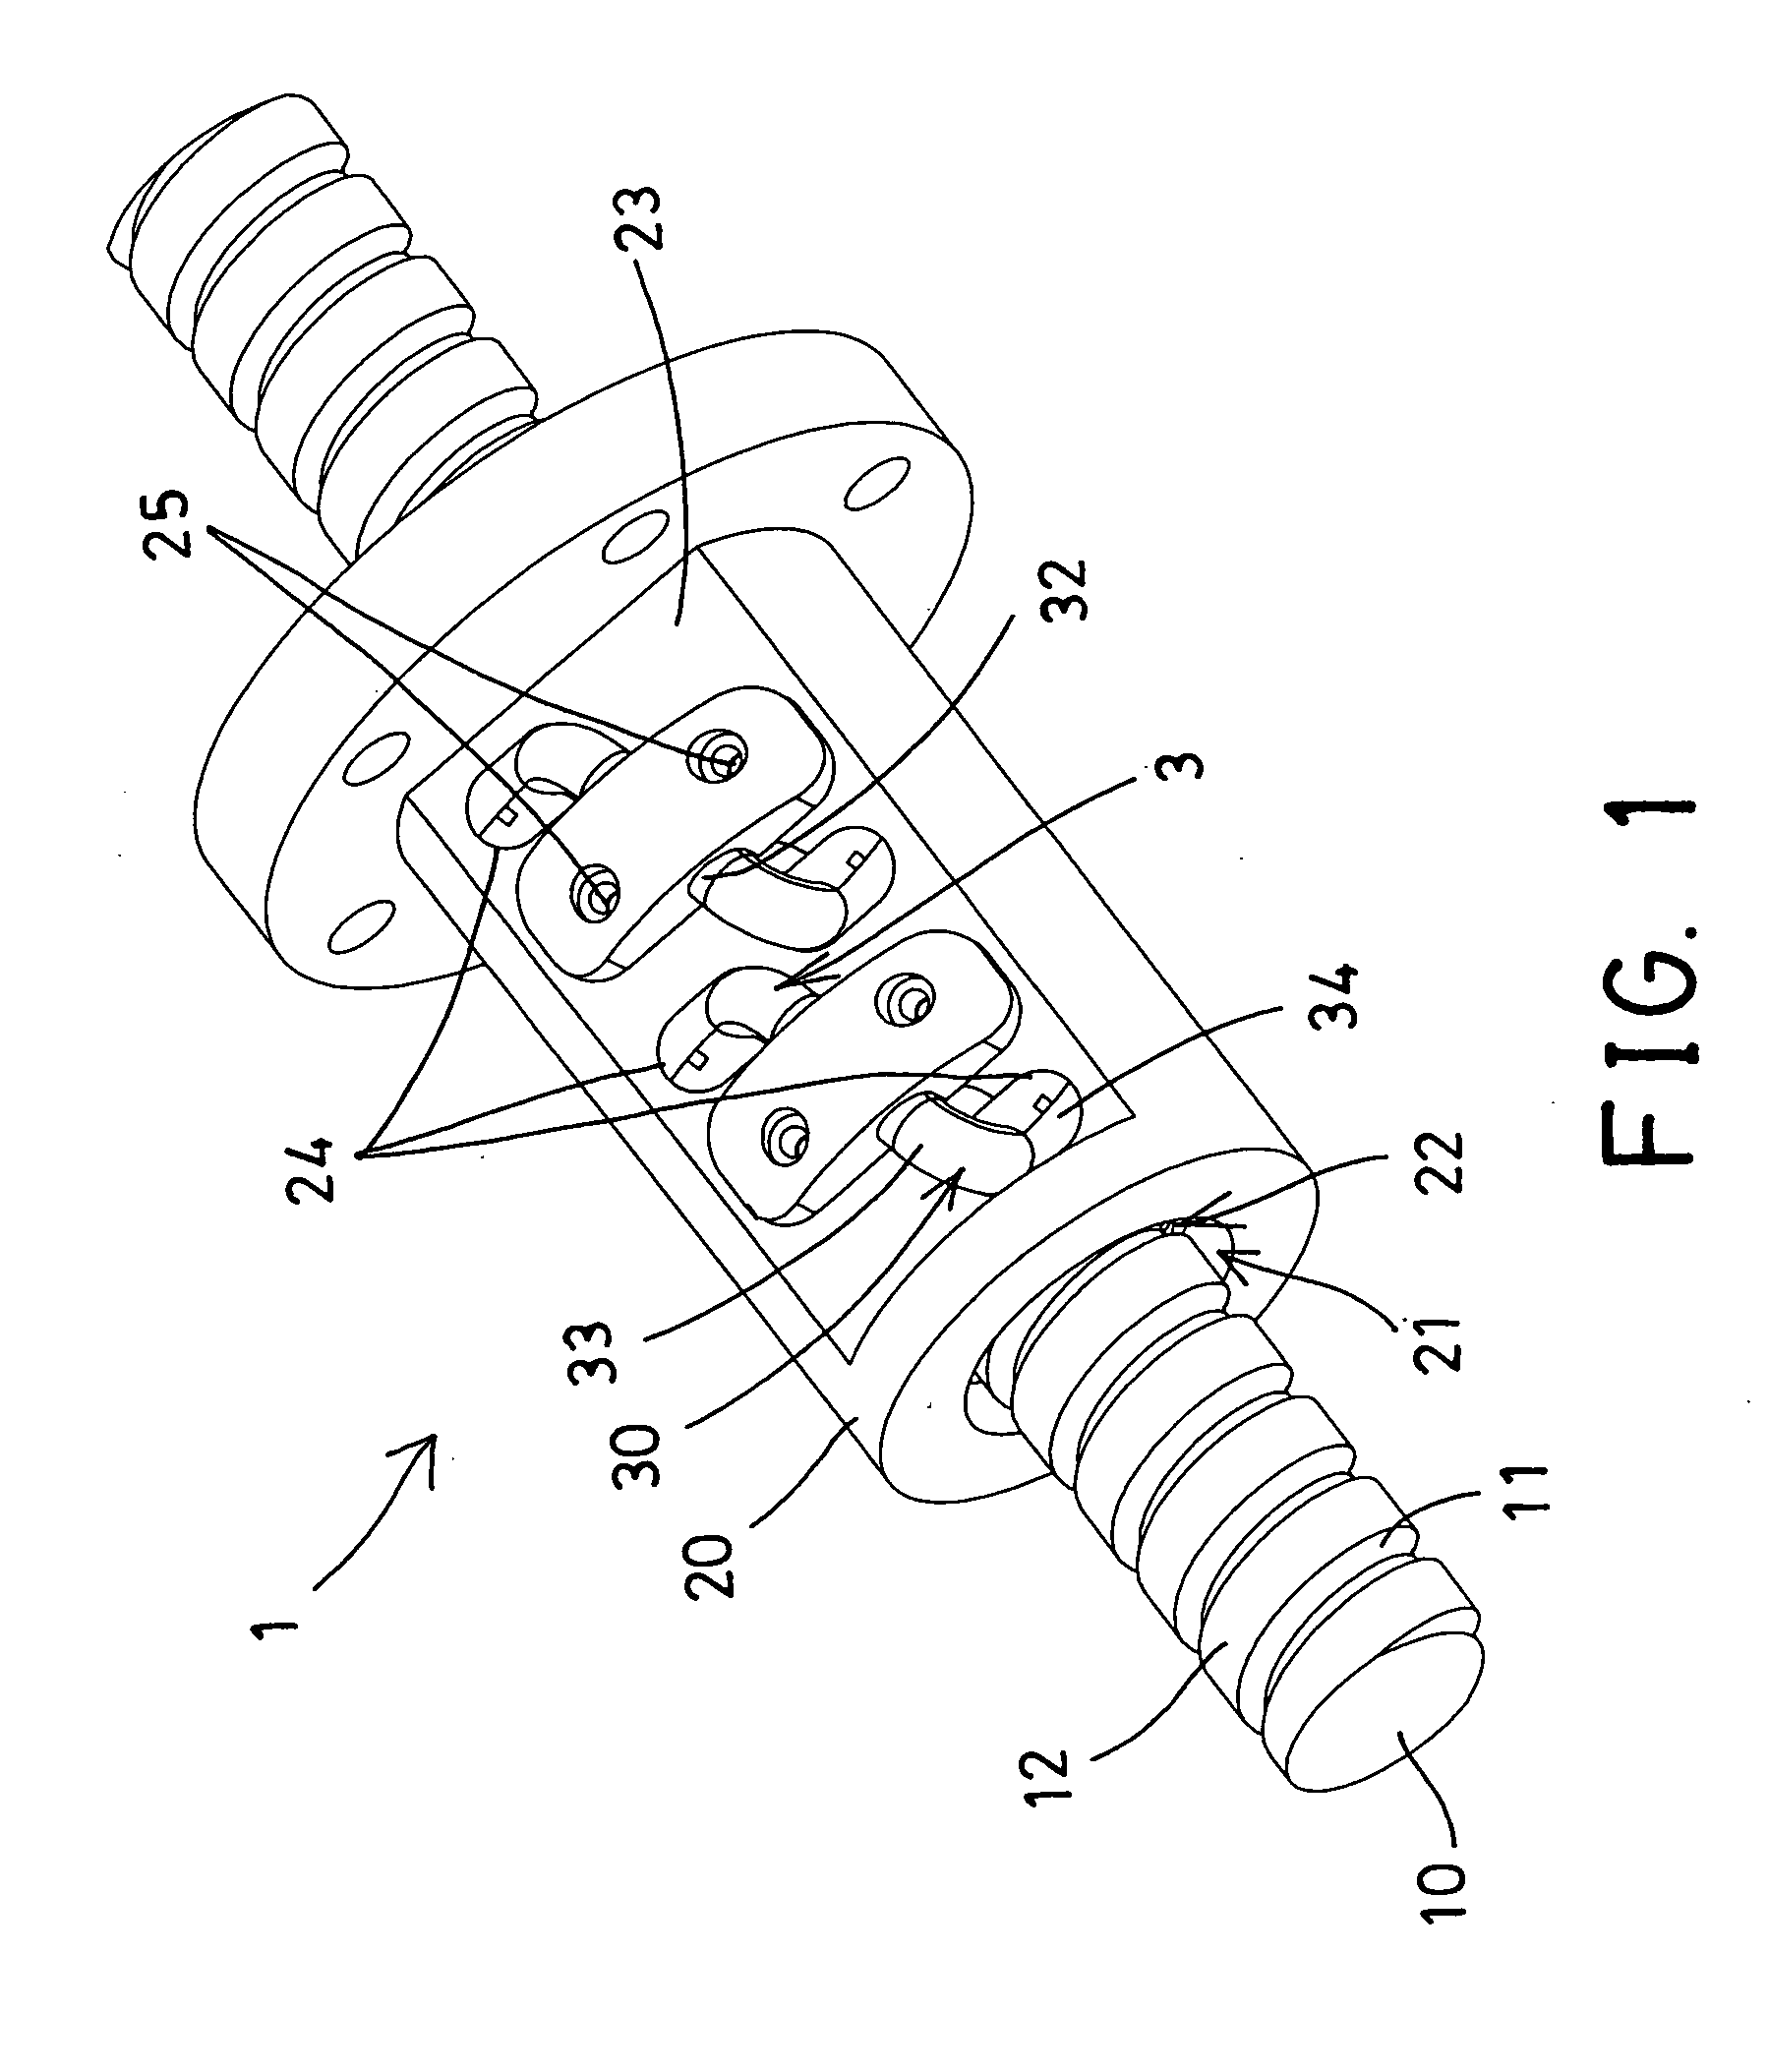 Circulating device for motion guide apparatus